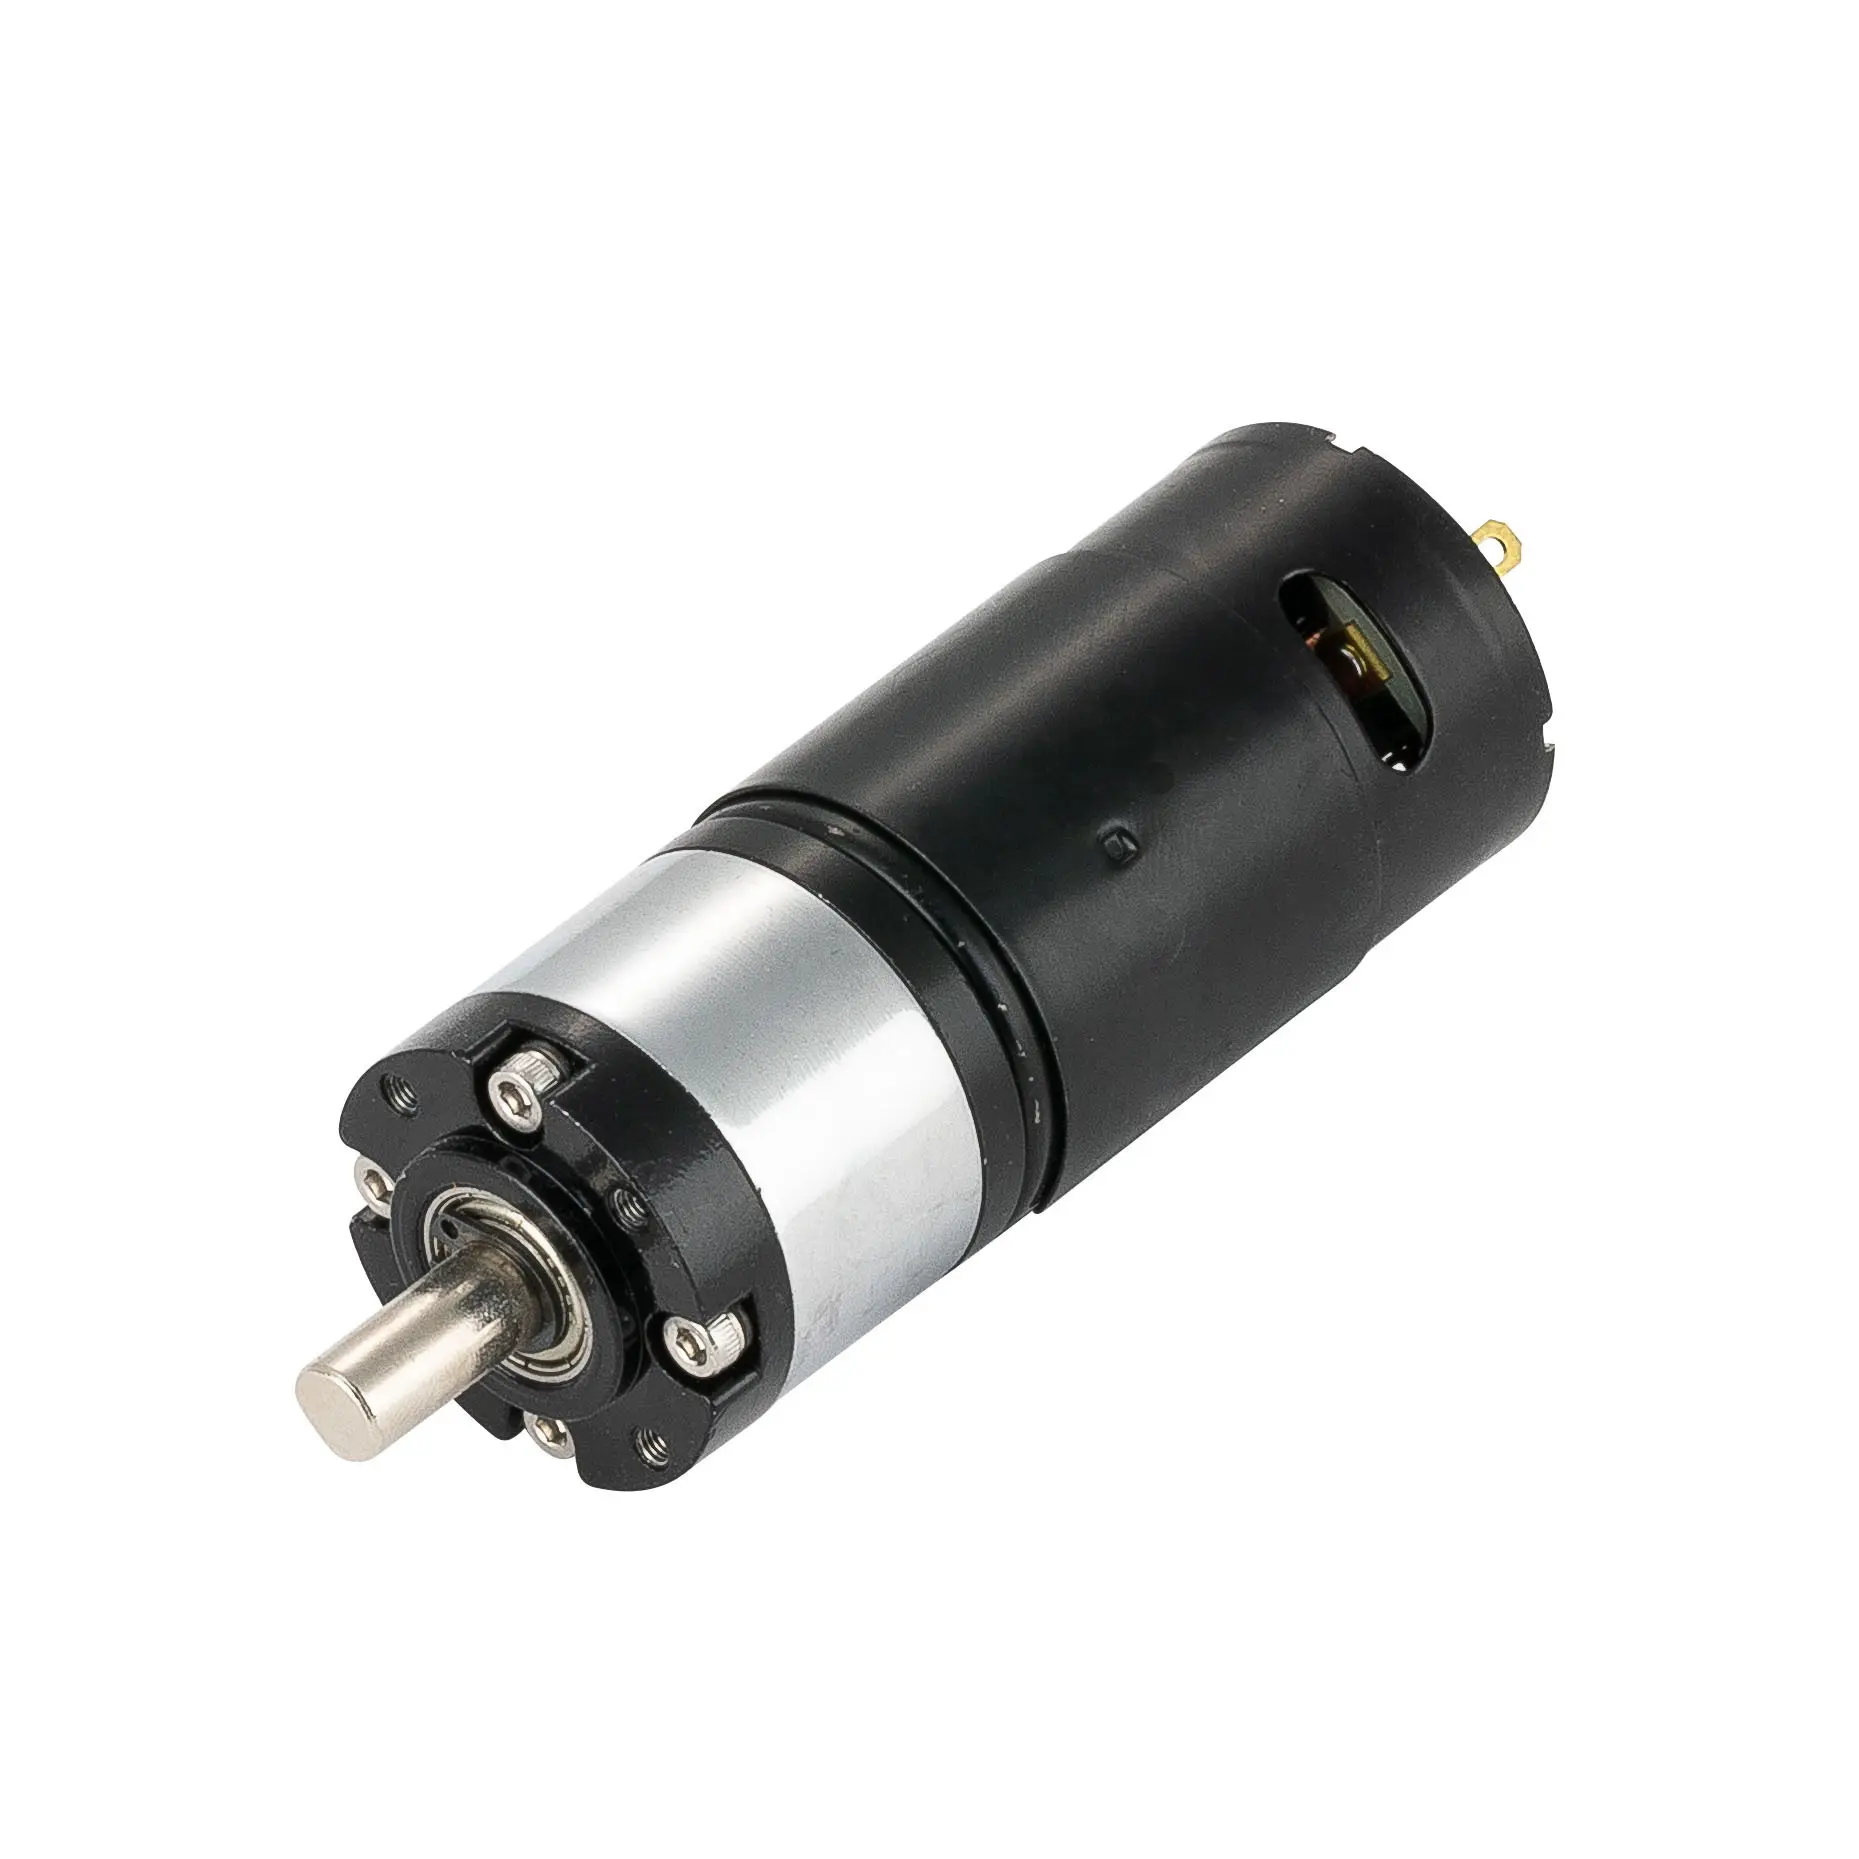 Details about   6mm DC 3V 3.7V 100RPM Mini Coreless Gear Motor Micro Planetary Gearbox DIY Robot 